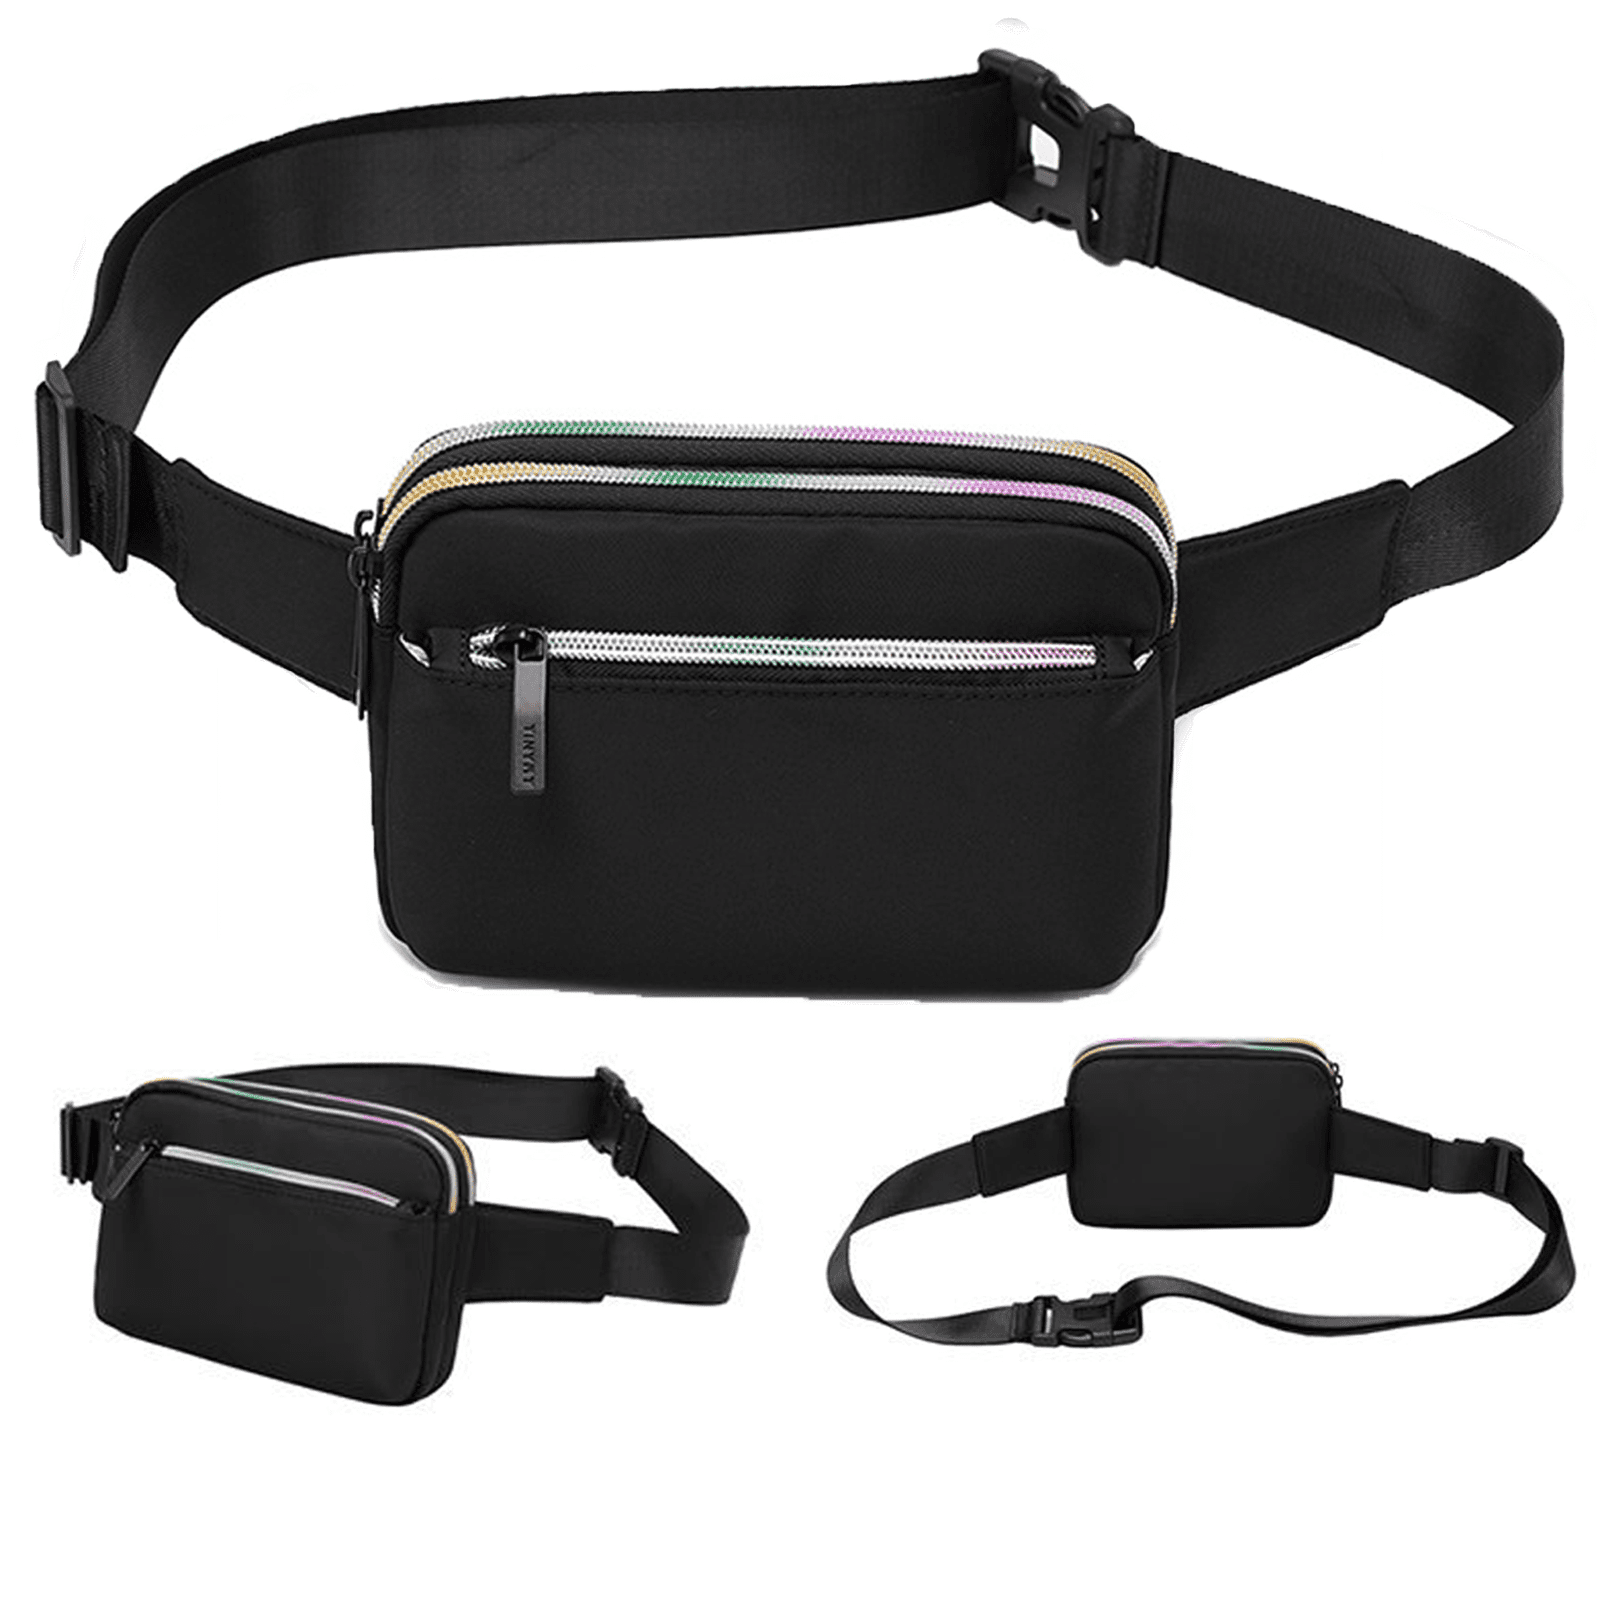 Fanny Packs for Women Fashionable, Cute Belt Bag Black Fanny Pack for Men  with Multi-Pockets Adjustable Belts, Fashion Grey Crossbody Bum Bags for